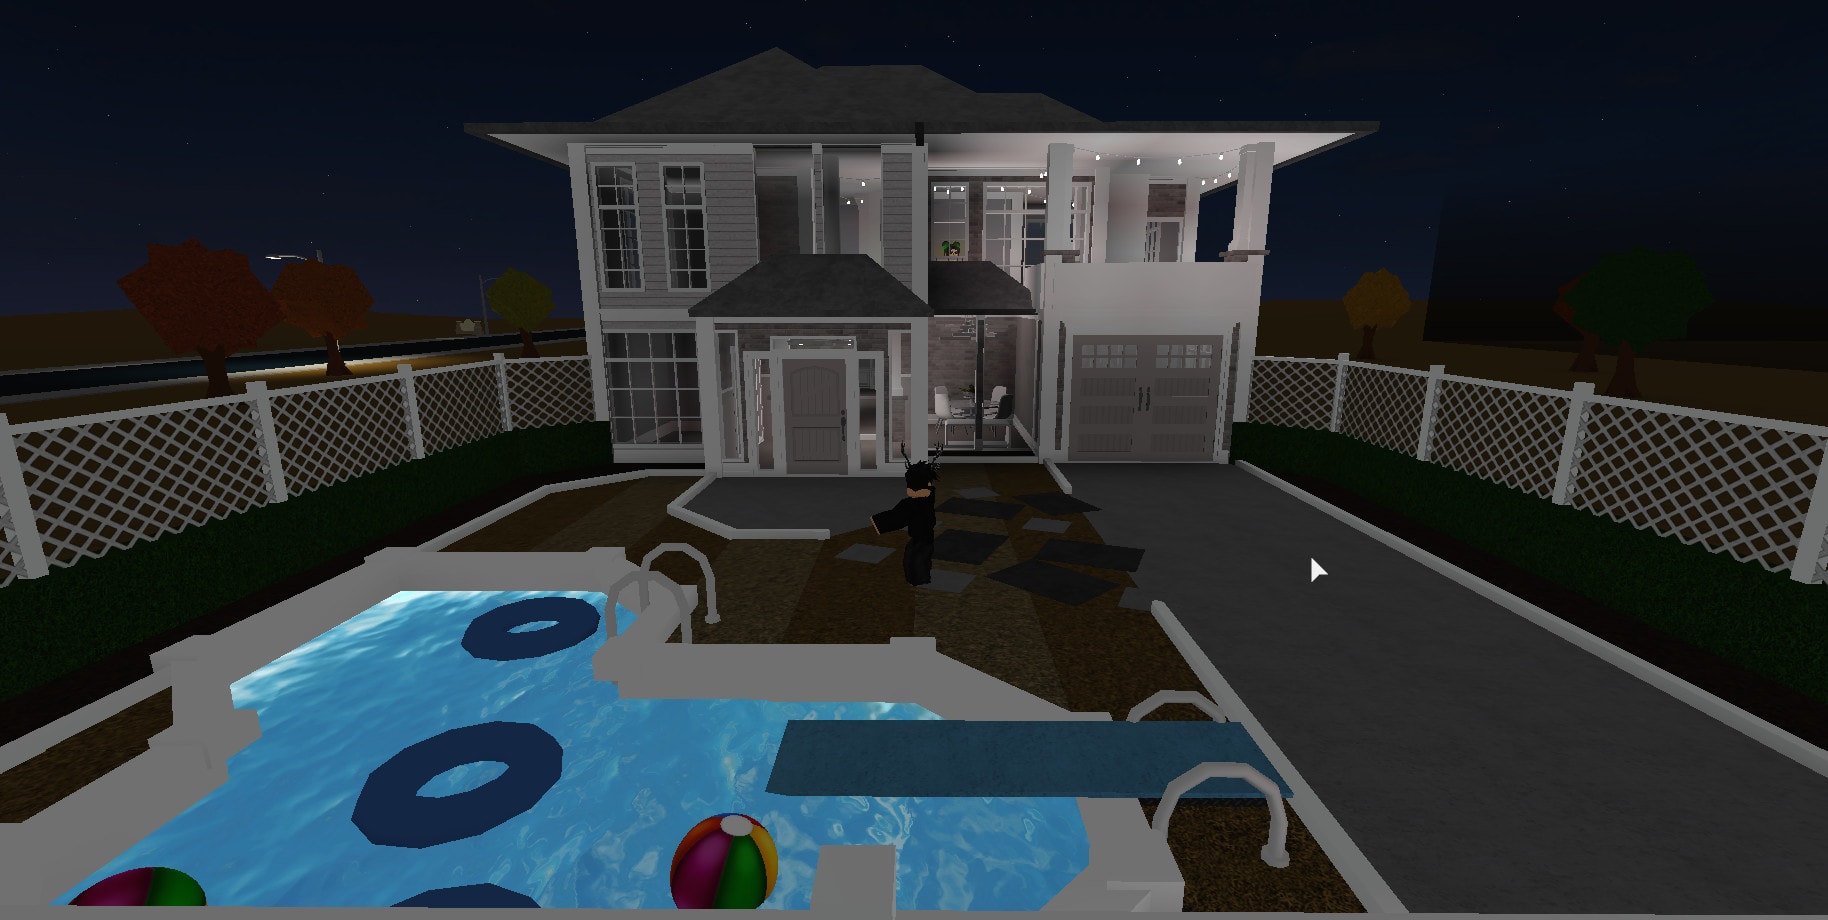 Build Your Roblox Bloxburg House For Cheap By Silverzfx - pictures of roblox bloxburg houses (cheap)